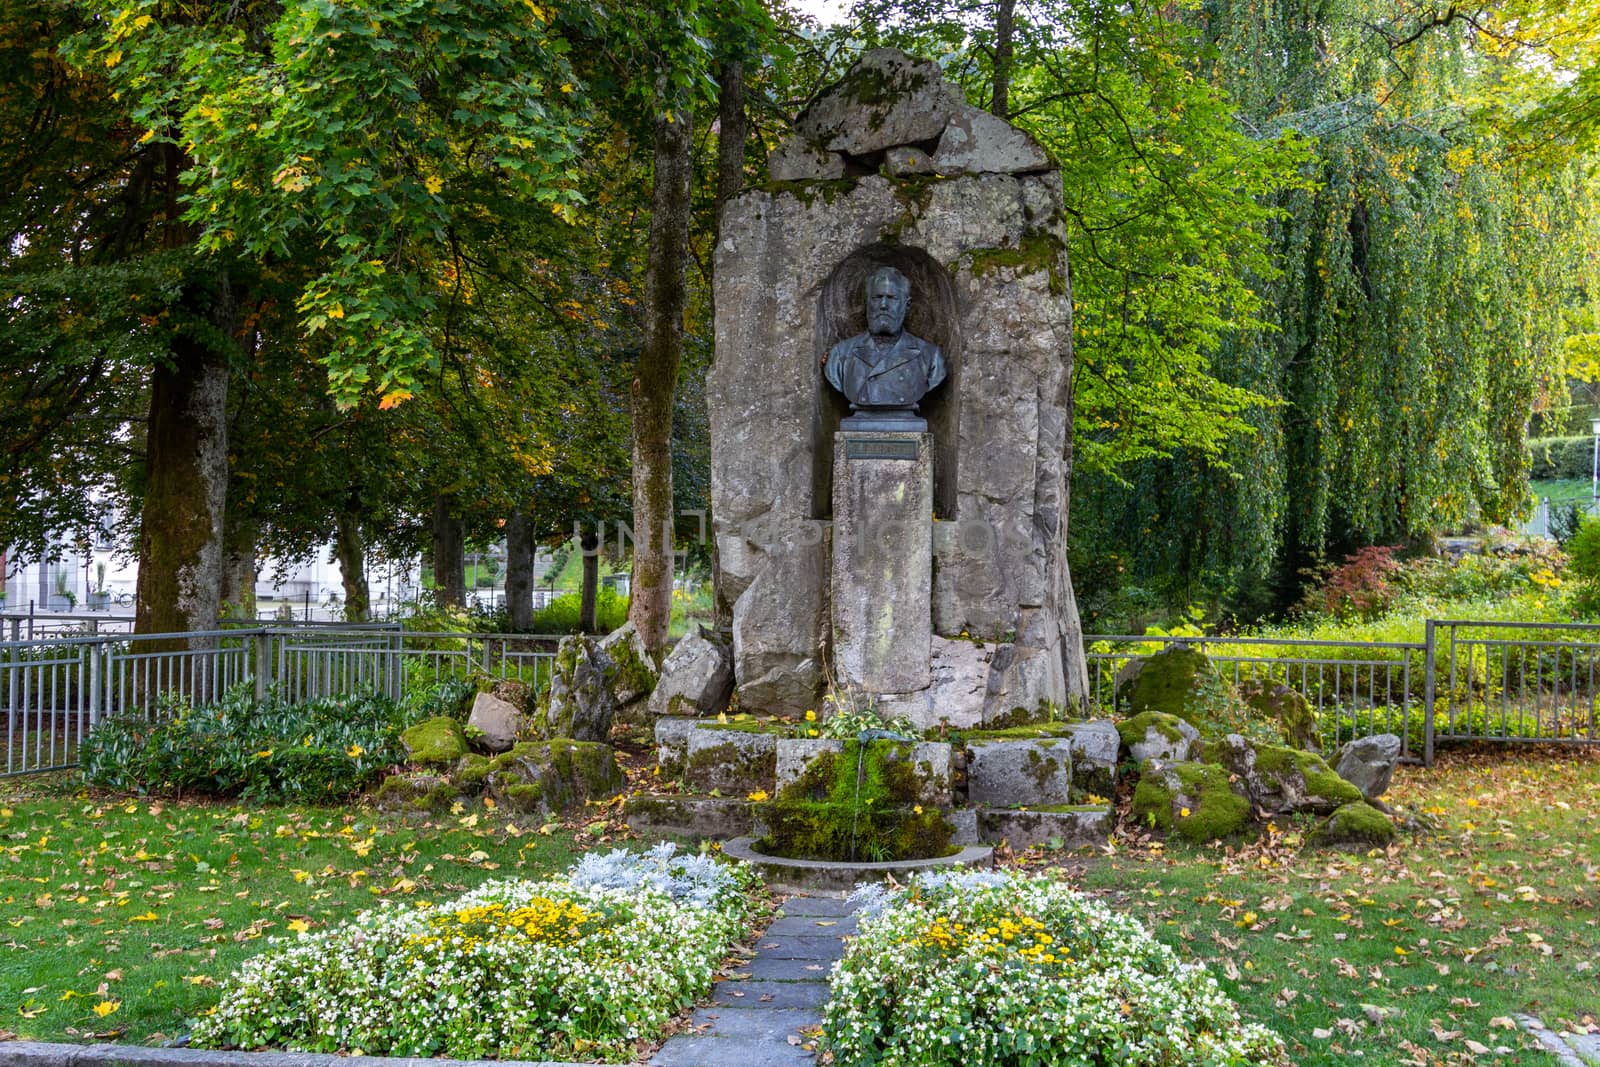 Krafft monument in St. Blasien Black Forest, Germany, trees with multi colored leaves, white and yellow flowers in the foreground